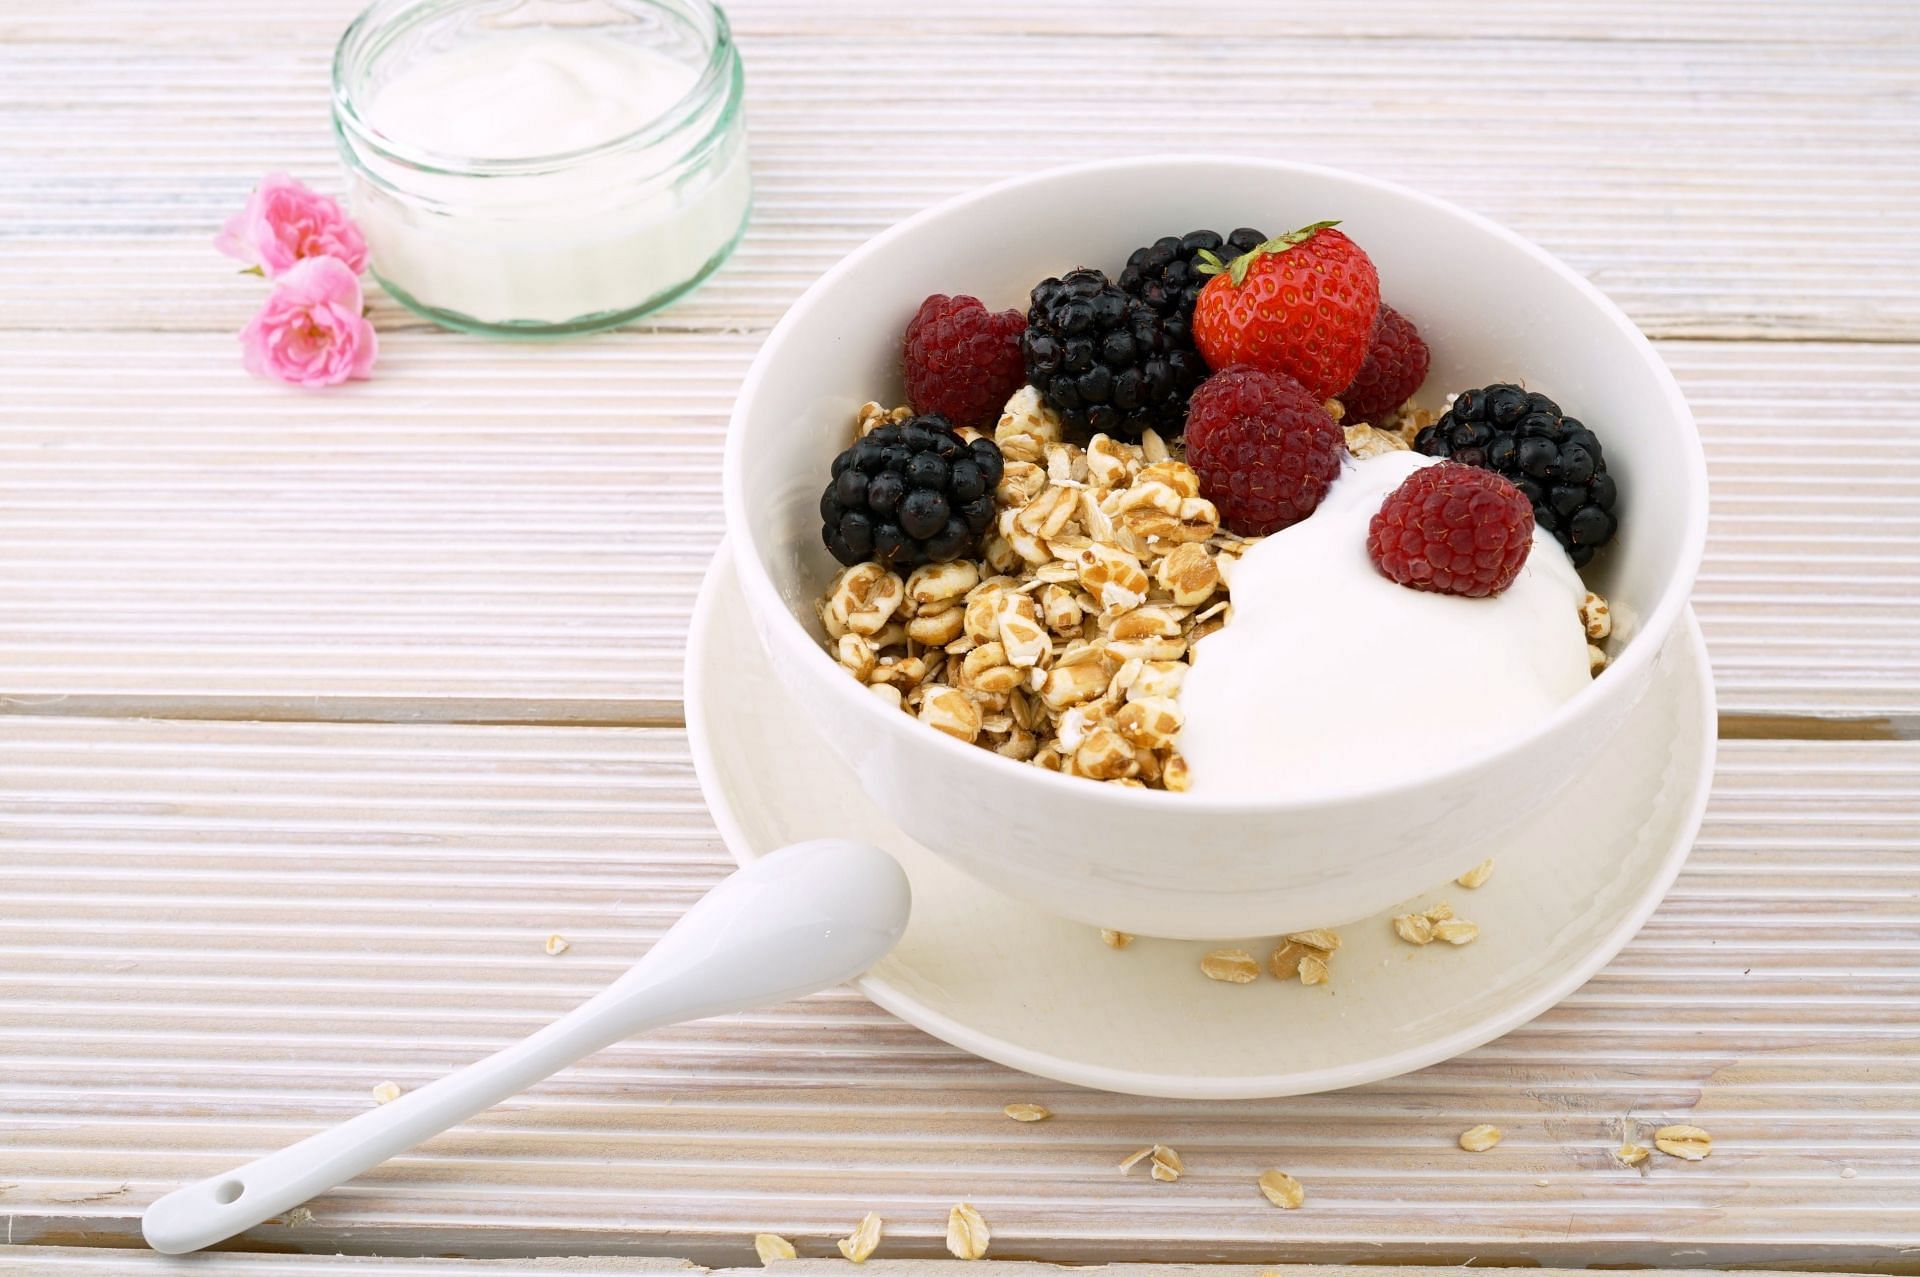 healthy foods to eat everyday (image sourced via Pexels / Photo by life of pix)